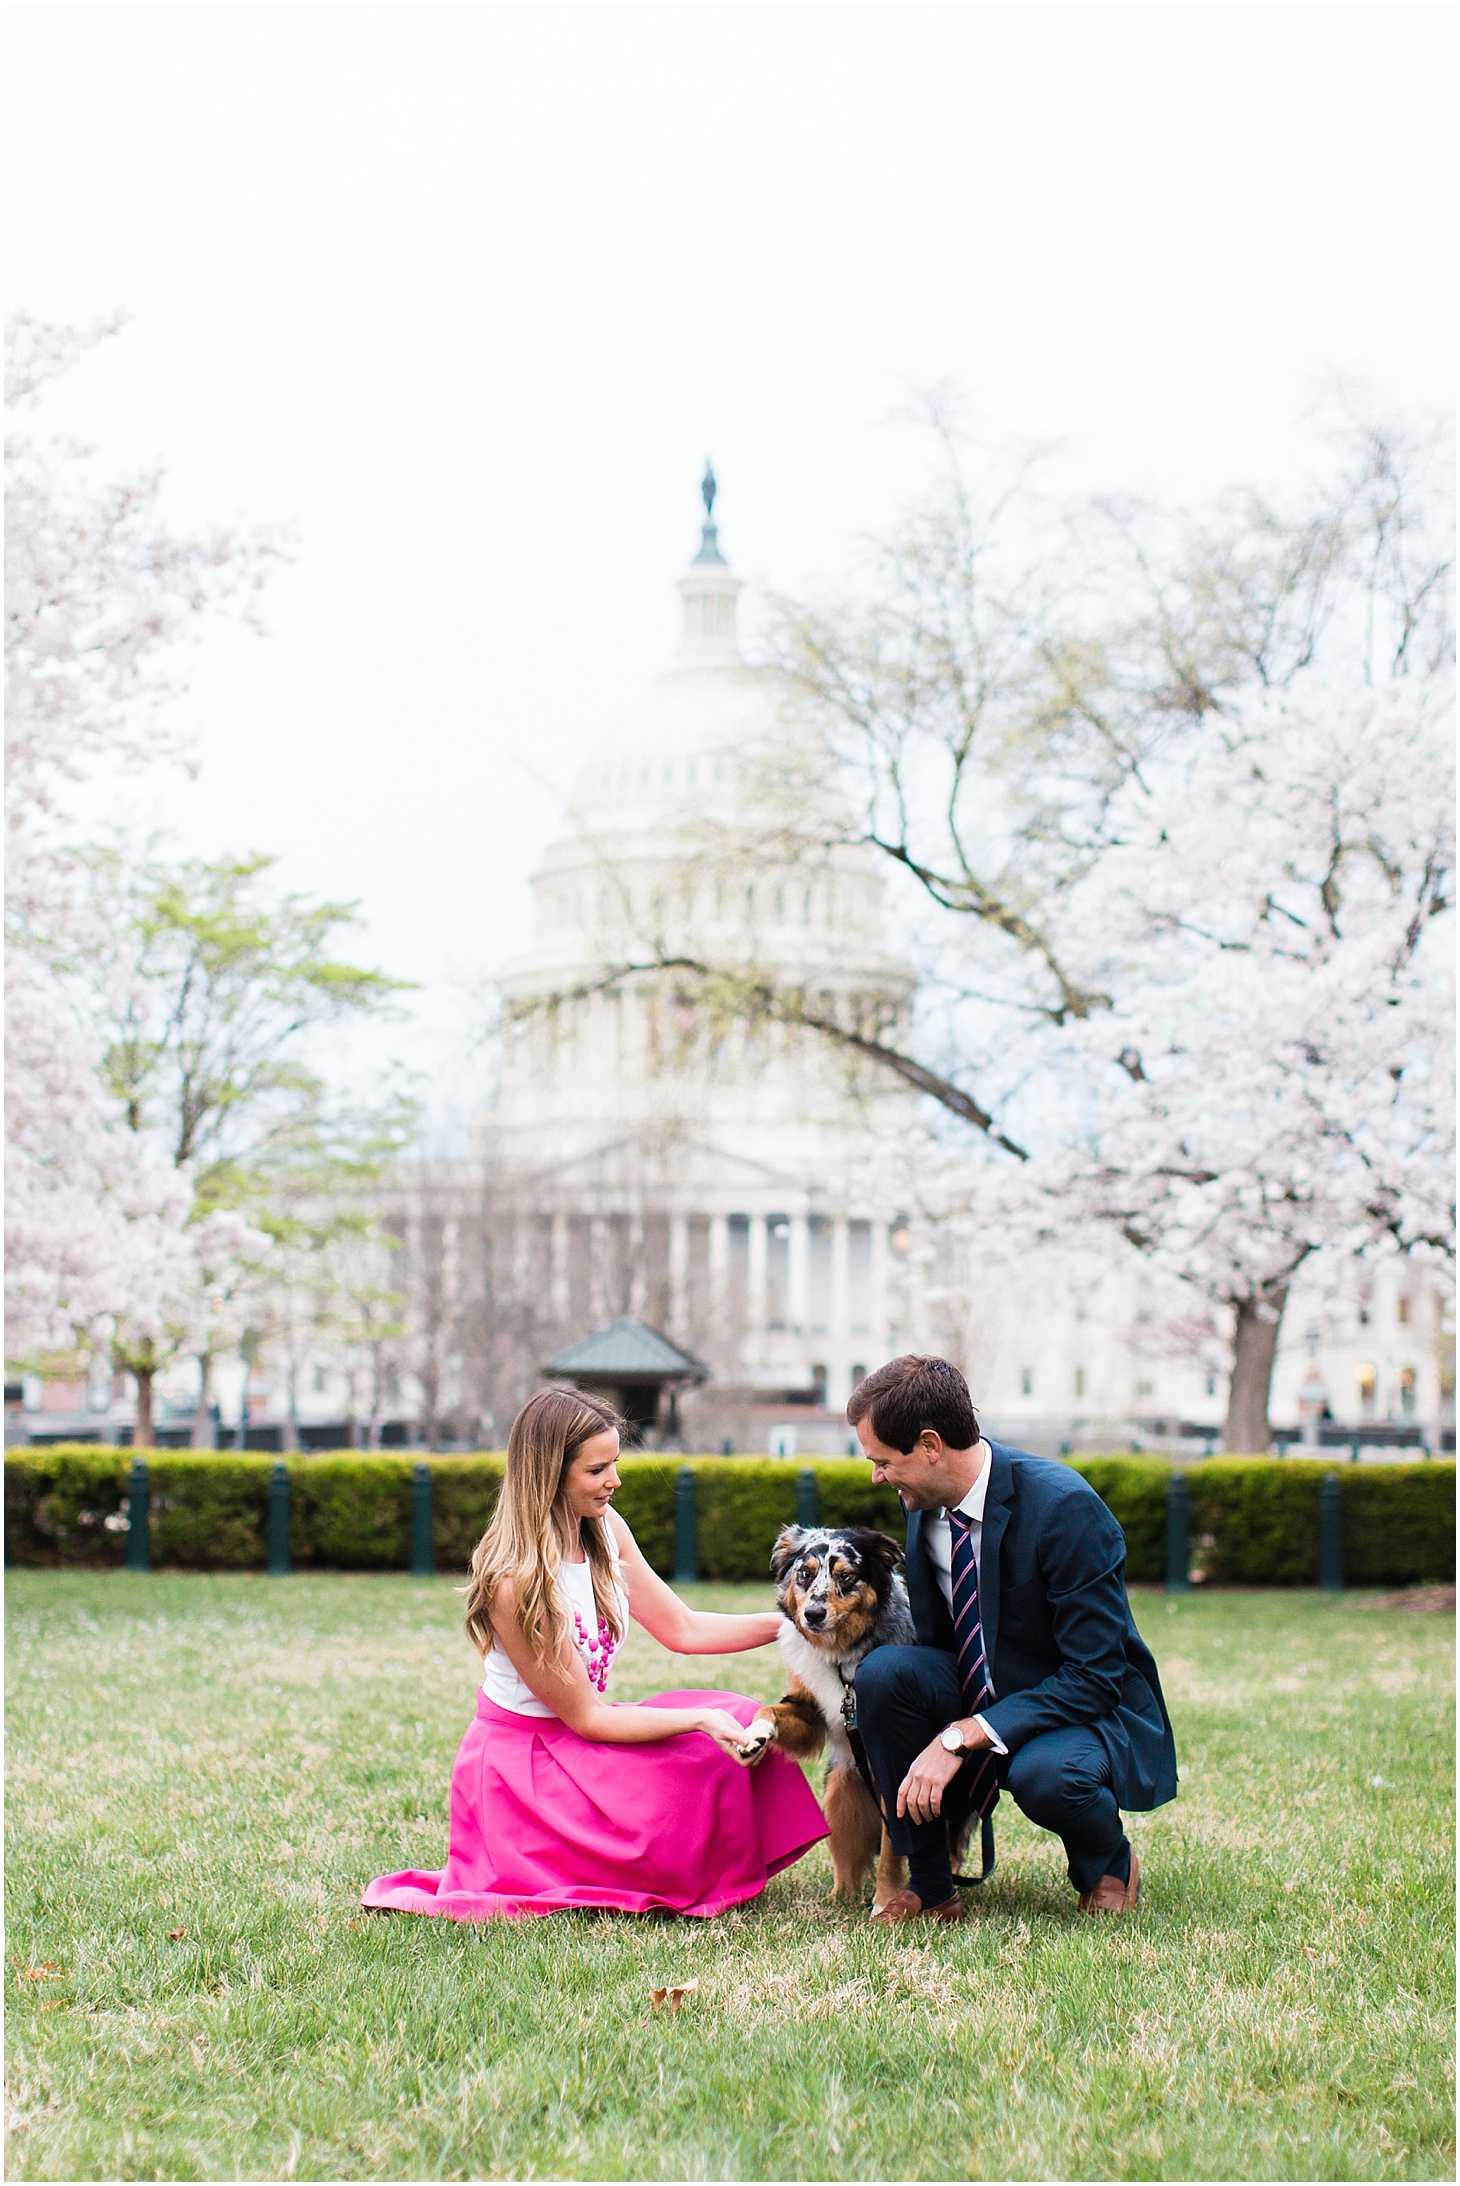 Engagement Portraits with Dog and Cherry Blossoms at Capitol, Spring Sunrise Engagement at US Capitol and Yards Park, Sarah Bradshaw Photography, DC Wedding Photographer